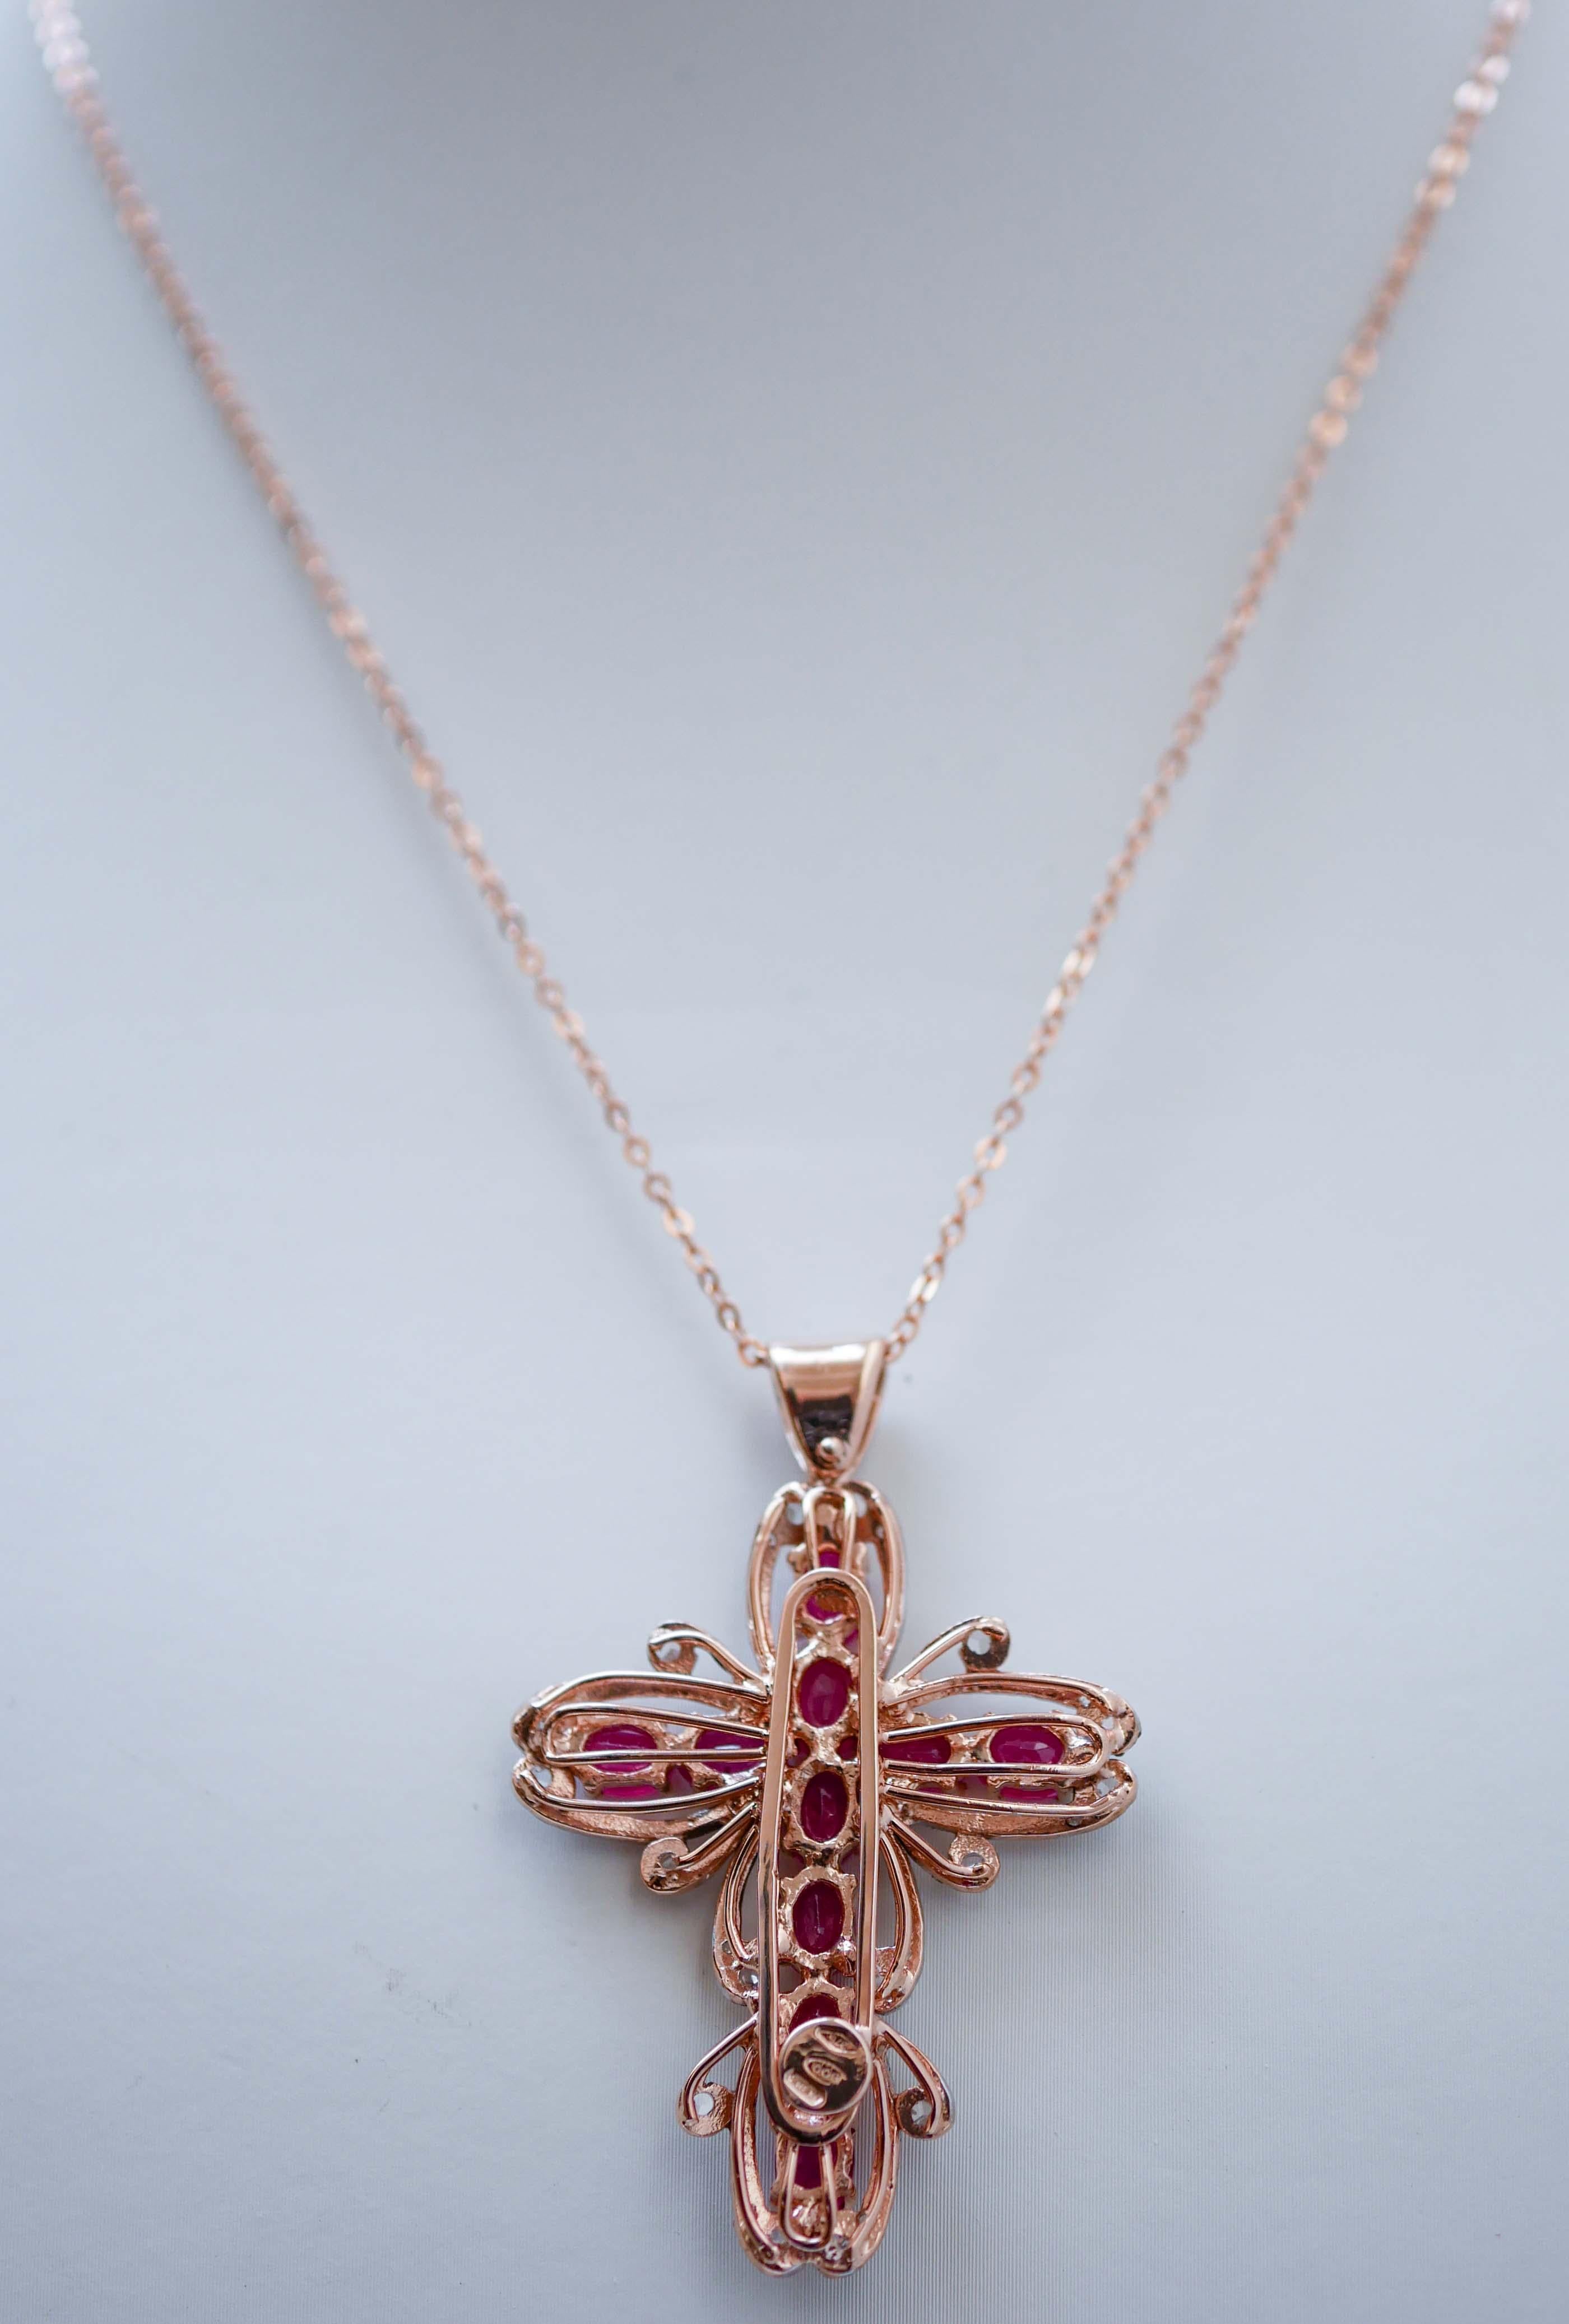 Mixed Cut Rubies, Diamonds, Rose Gold and Silver Cross Pendant Necklace. For Sale